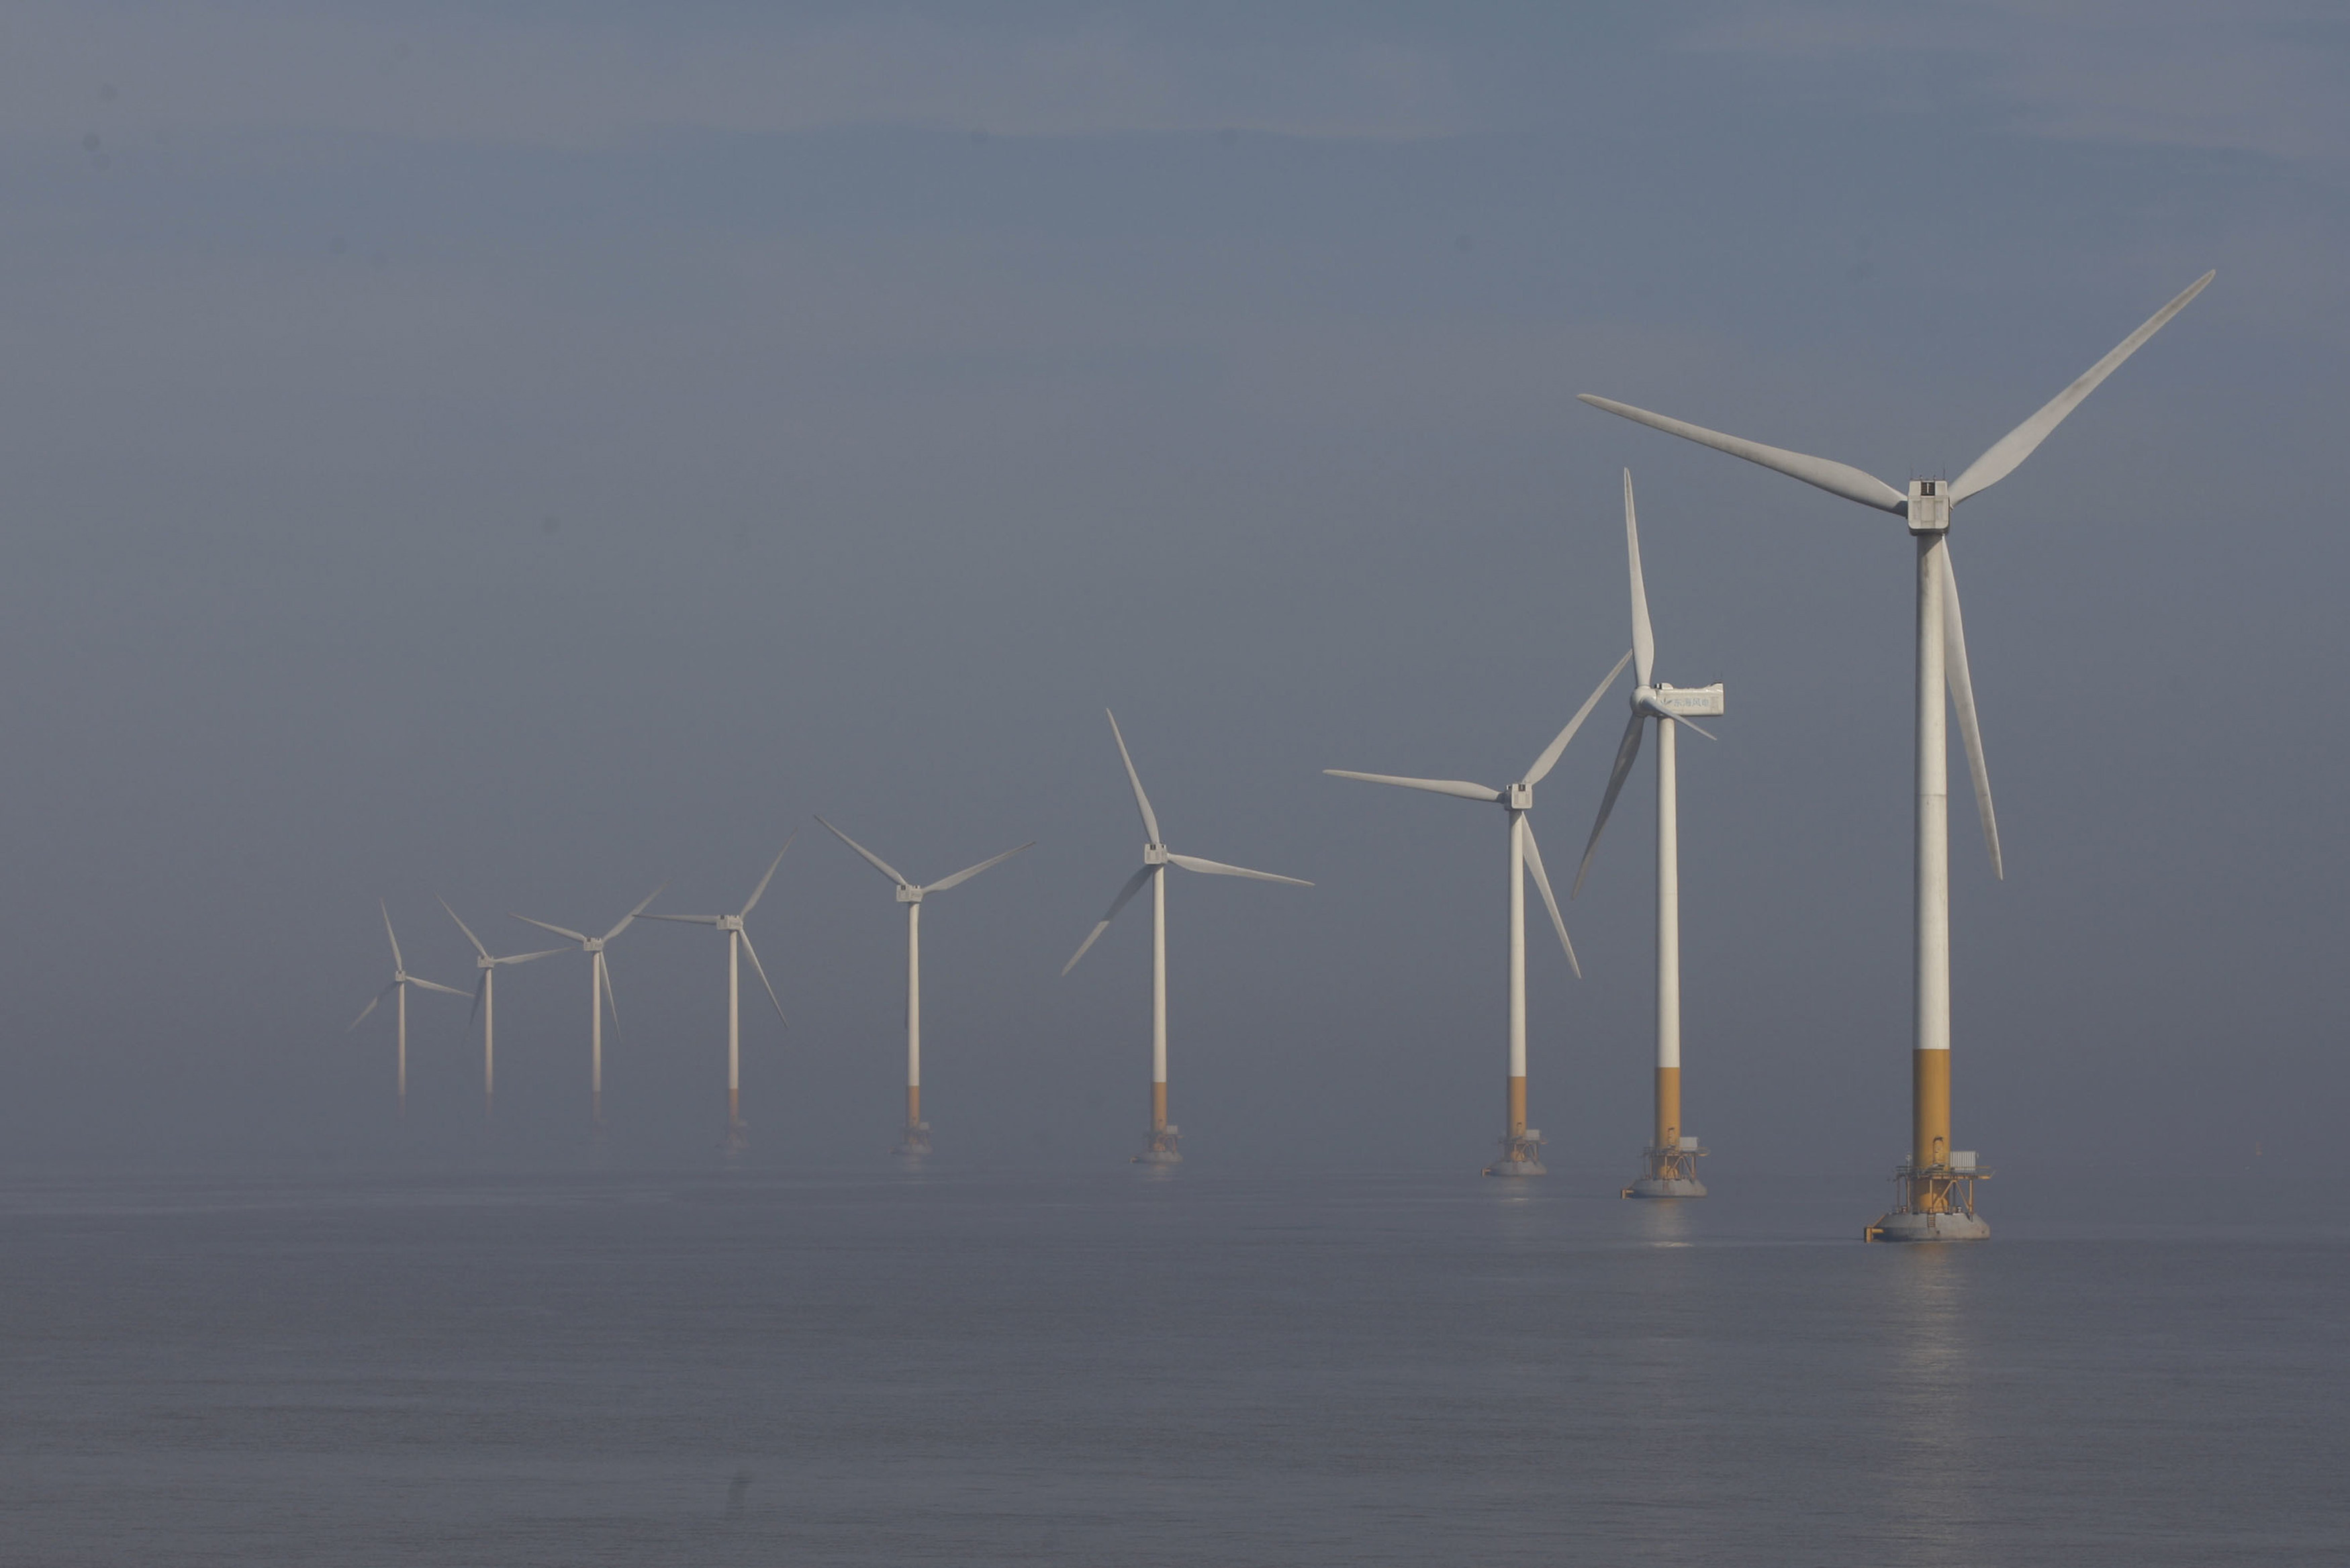 China added 11,098 wind turbines last year, with a total capacity of 49.83 million kW. Some 10 per cent of those were offshore. Photo: Chinatopix via AP